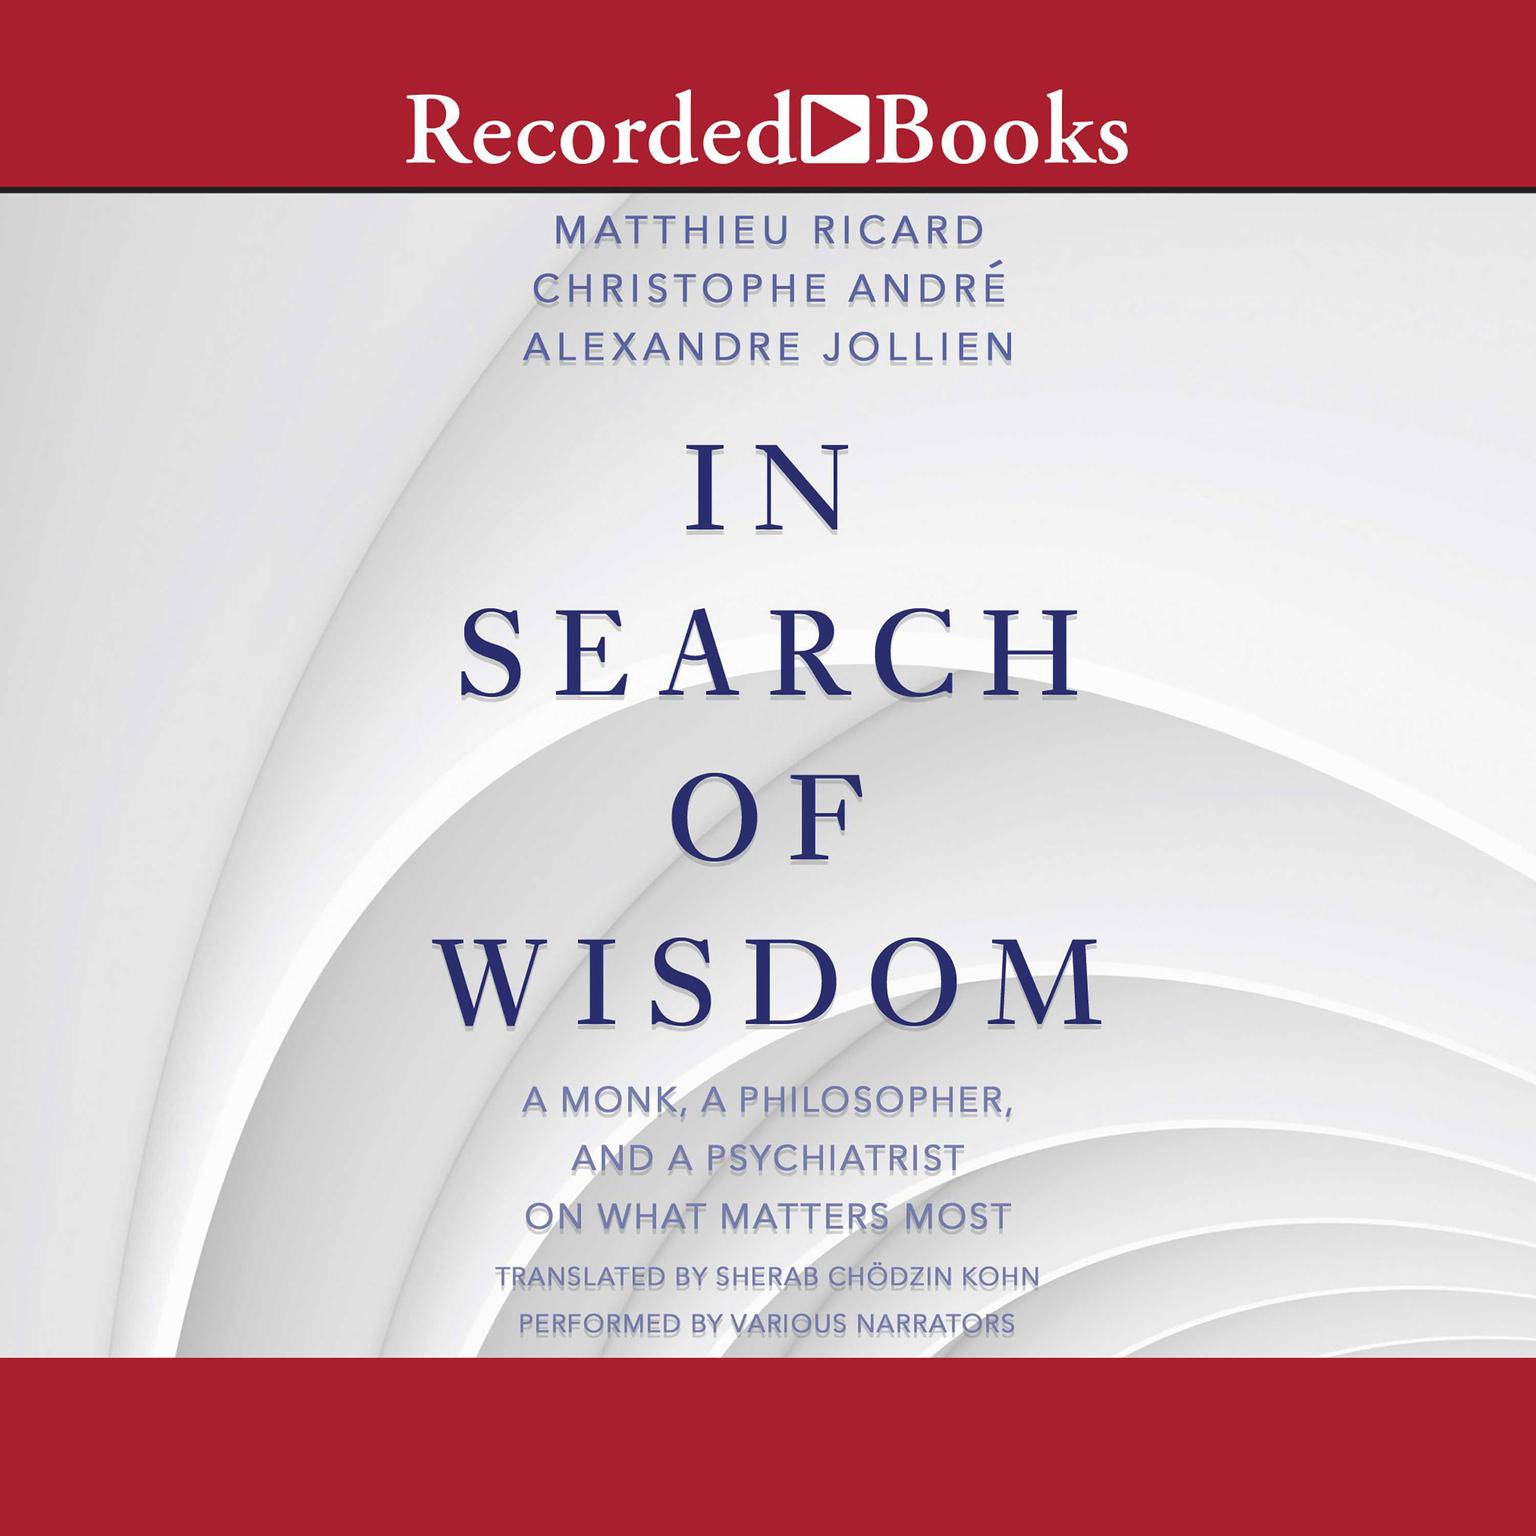 In Search of Wisdom Audiobook by Matthieu Ricard — Download Now